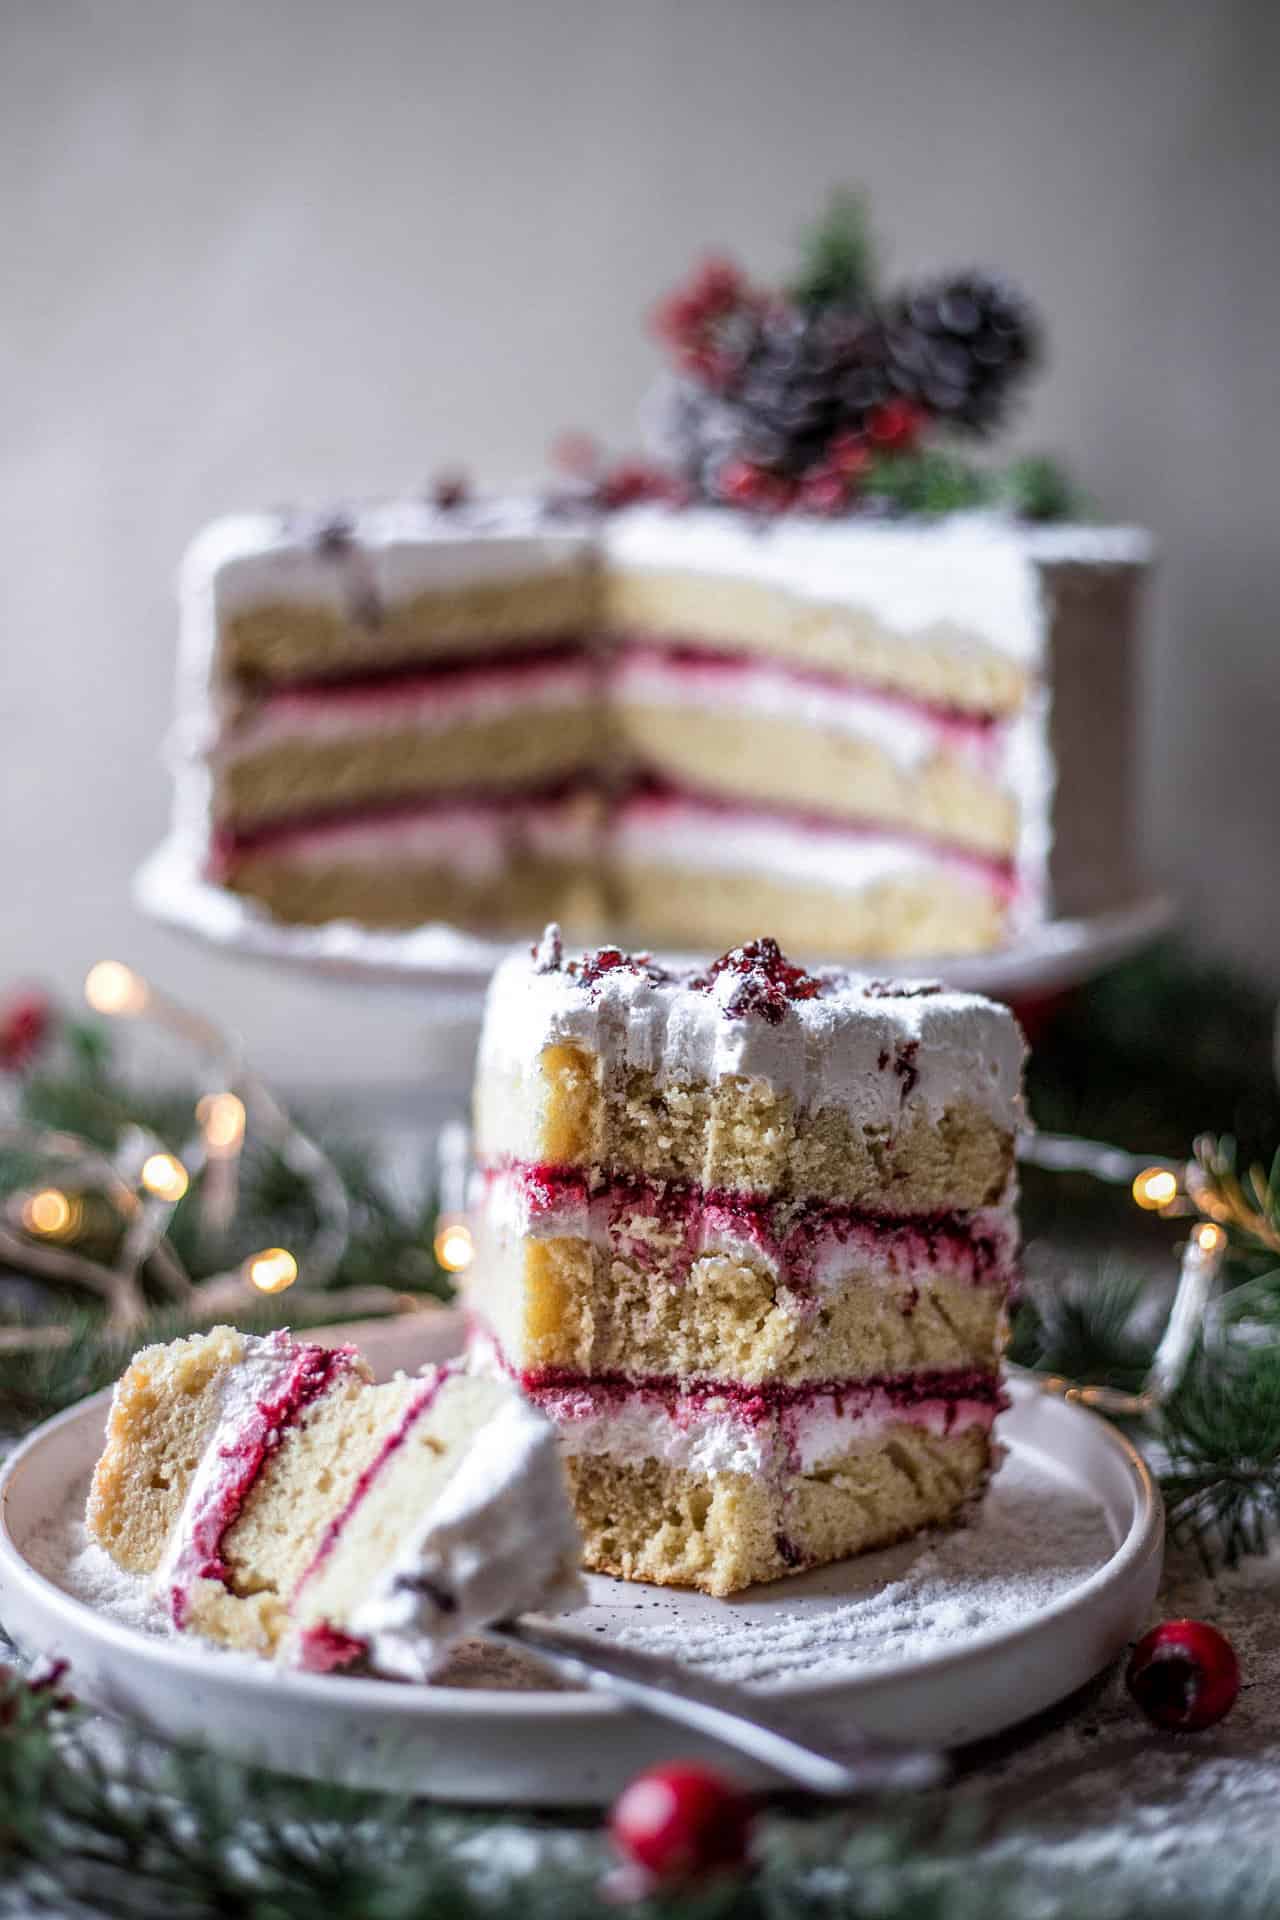 This Gluten-Free Cranberry Cake with Cream Cheese Frosting is super flavorful, light, fluffy, creamy, perfectly sweetened and so delicious.